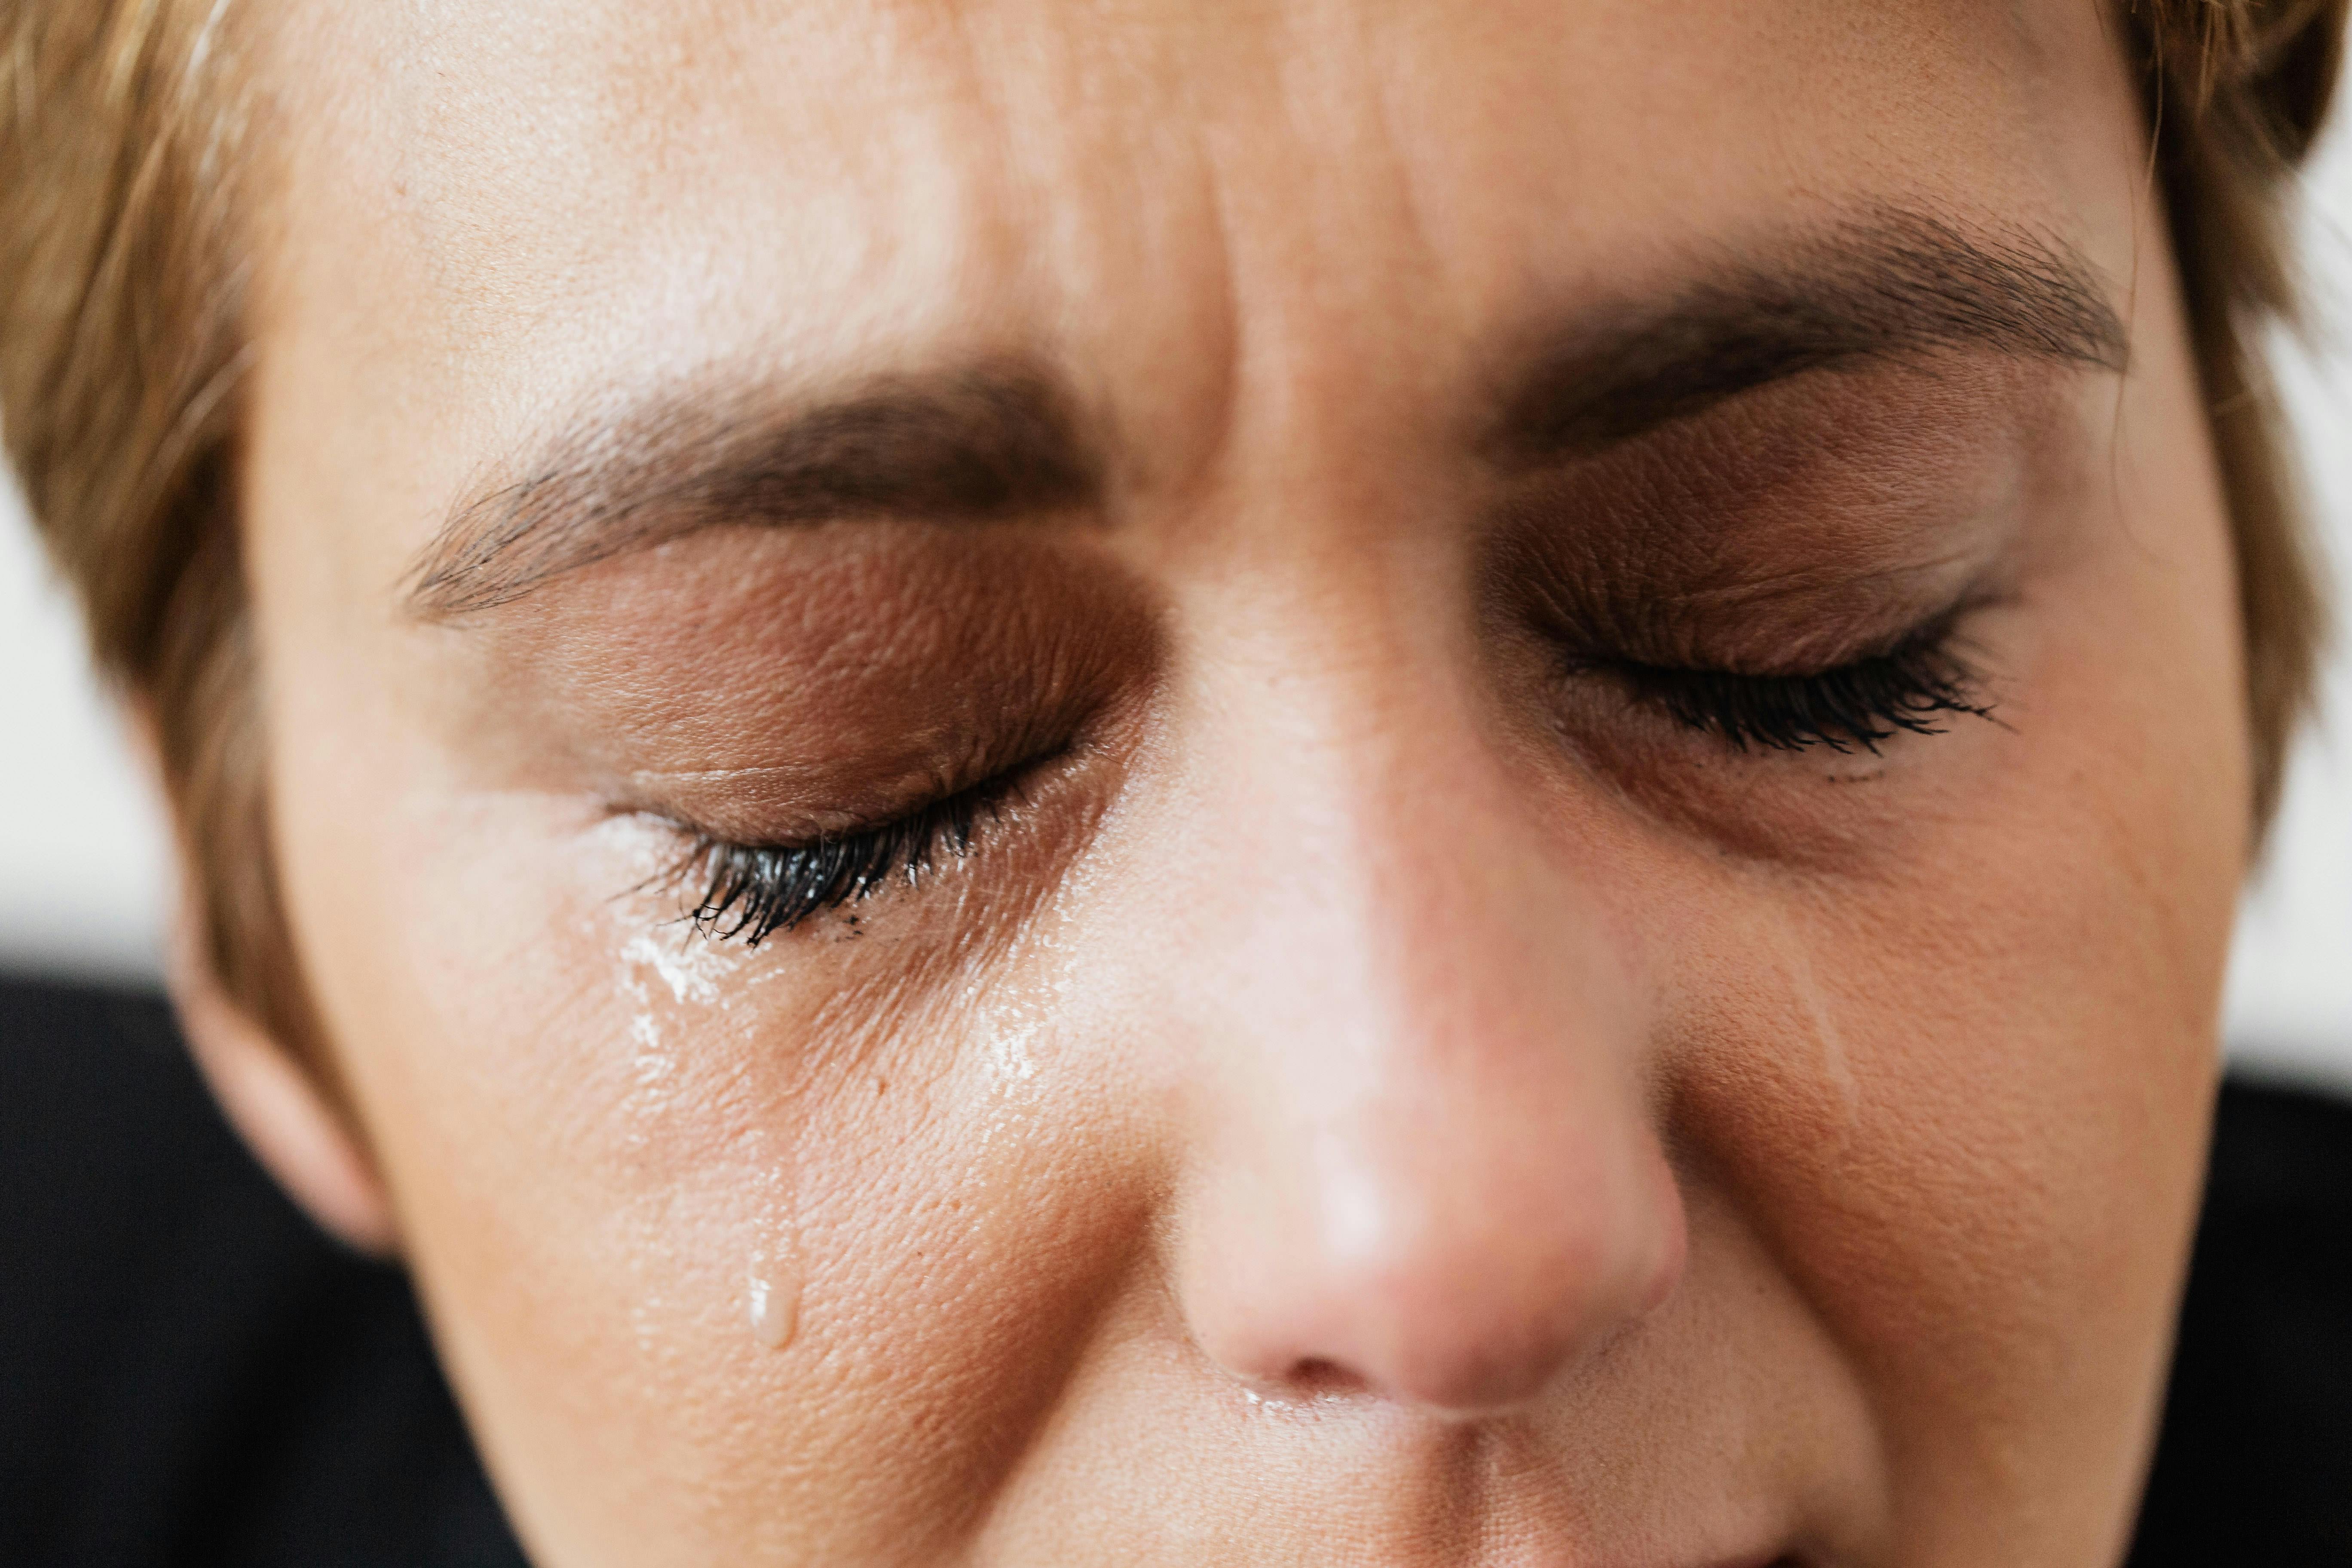 A closeup of a crying woman's eyes | Source: Pexels